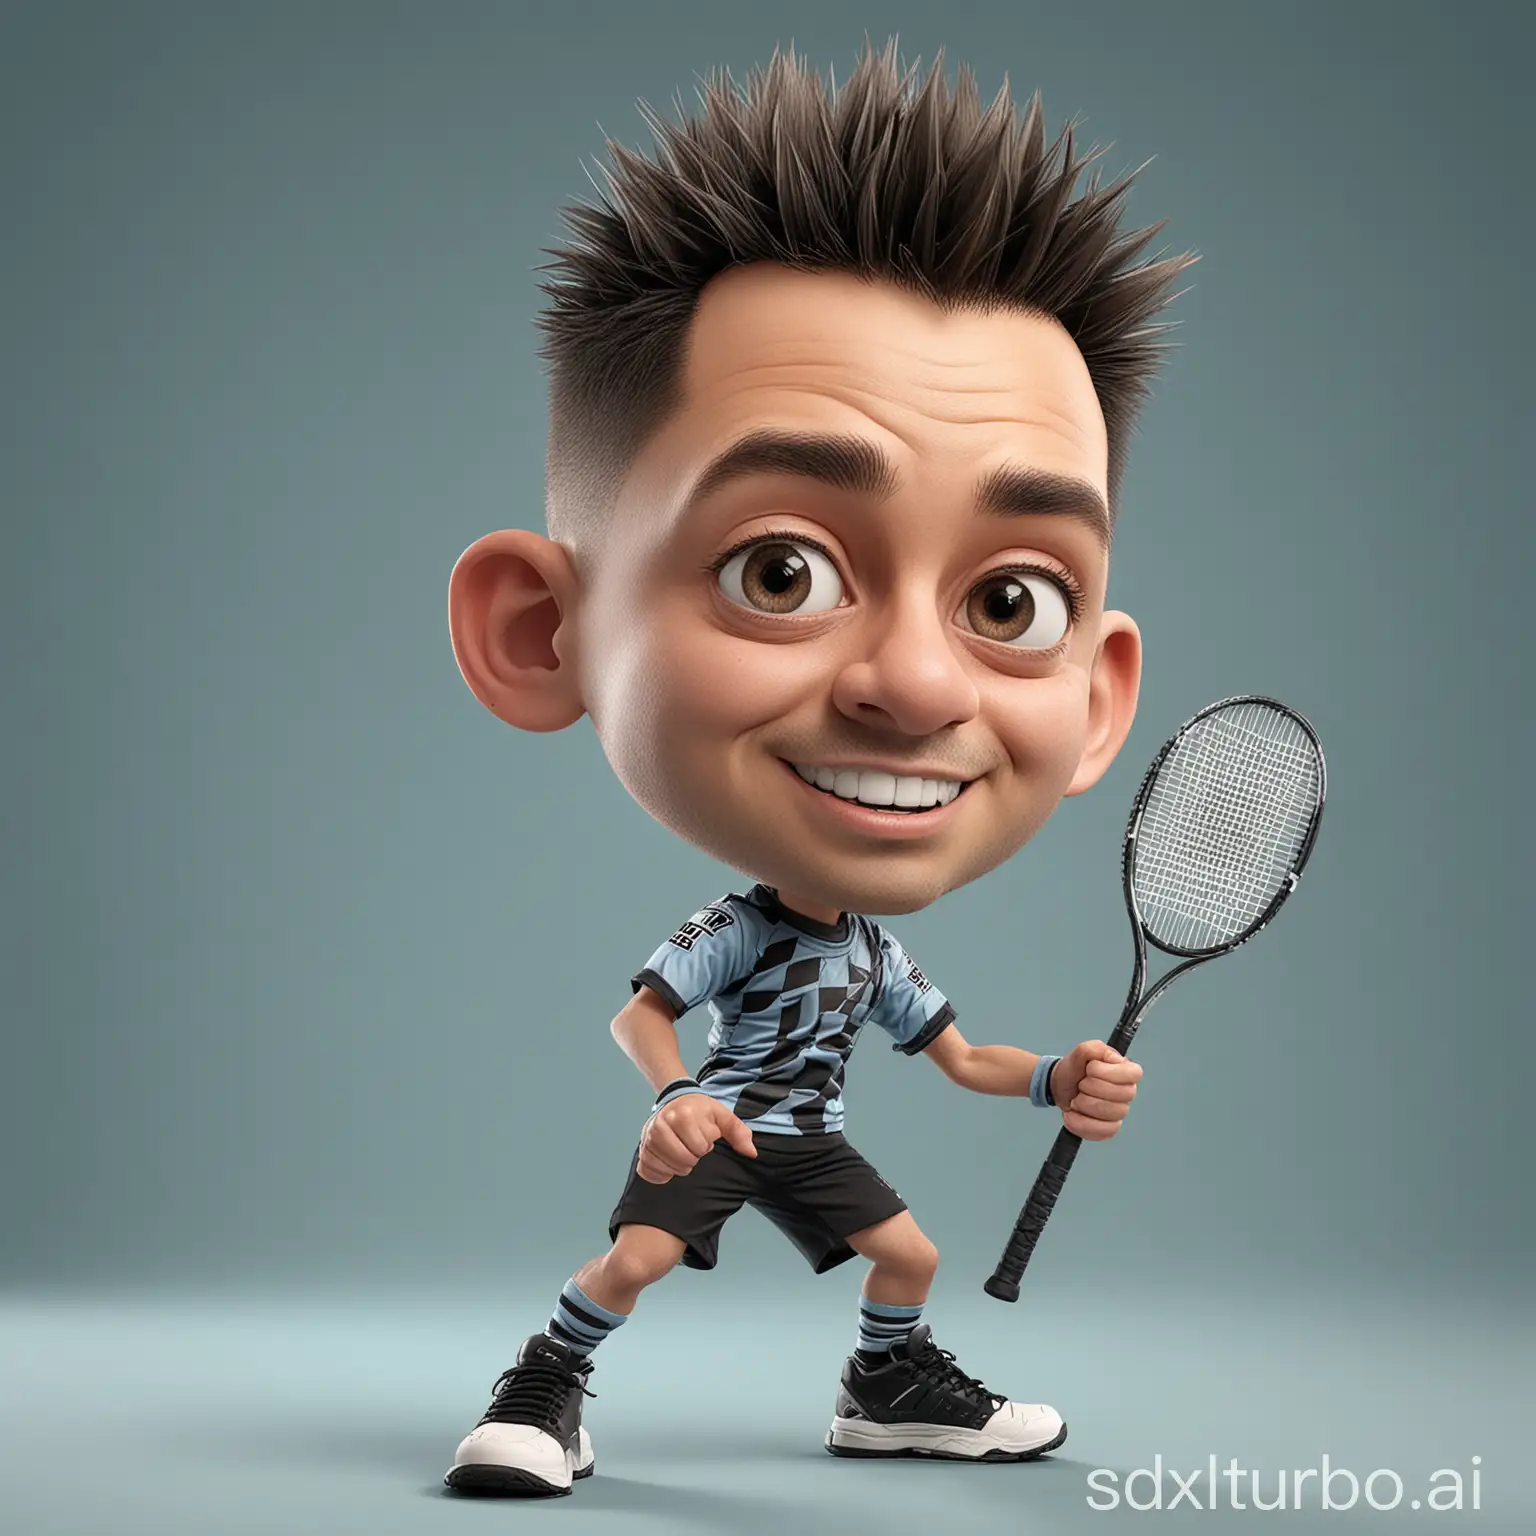 make a 3D caricature with a big head. a man wearing a badminton suit mixed with black and grey complete with a racket. with black and white striped socks. 35 years old, with spiky undercut hair. brown skin color. ideal body. light blue background. Background colored peach solid. Use soft photography lighting, hair lighting, top lighting, side lighting. Highest quality photos, Uhd,20k.